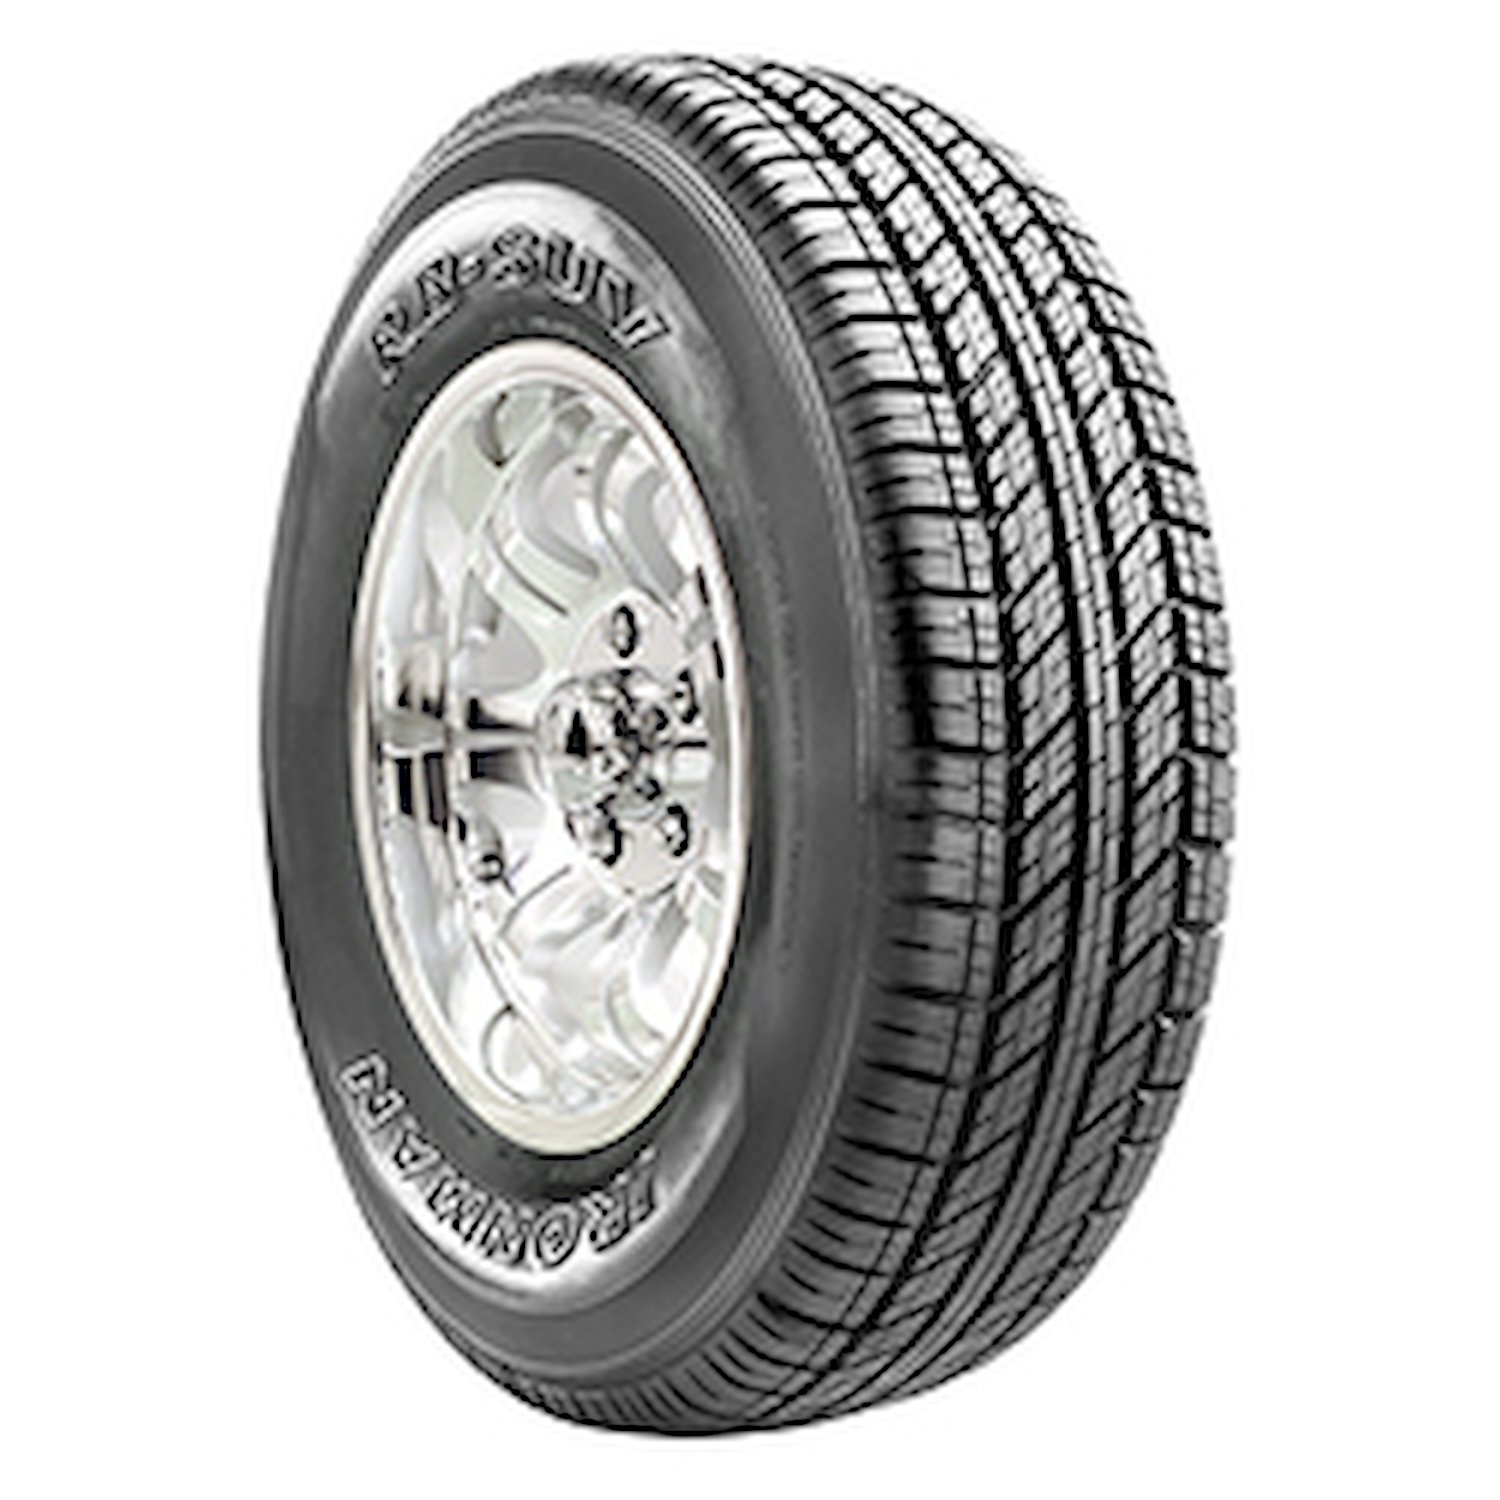 RB SUV Tire, 245/70R16 107S